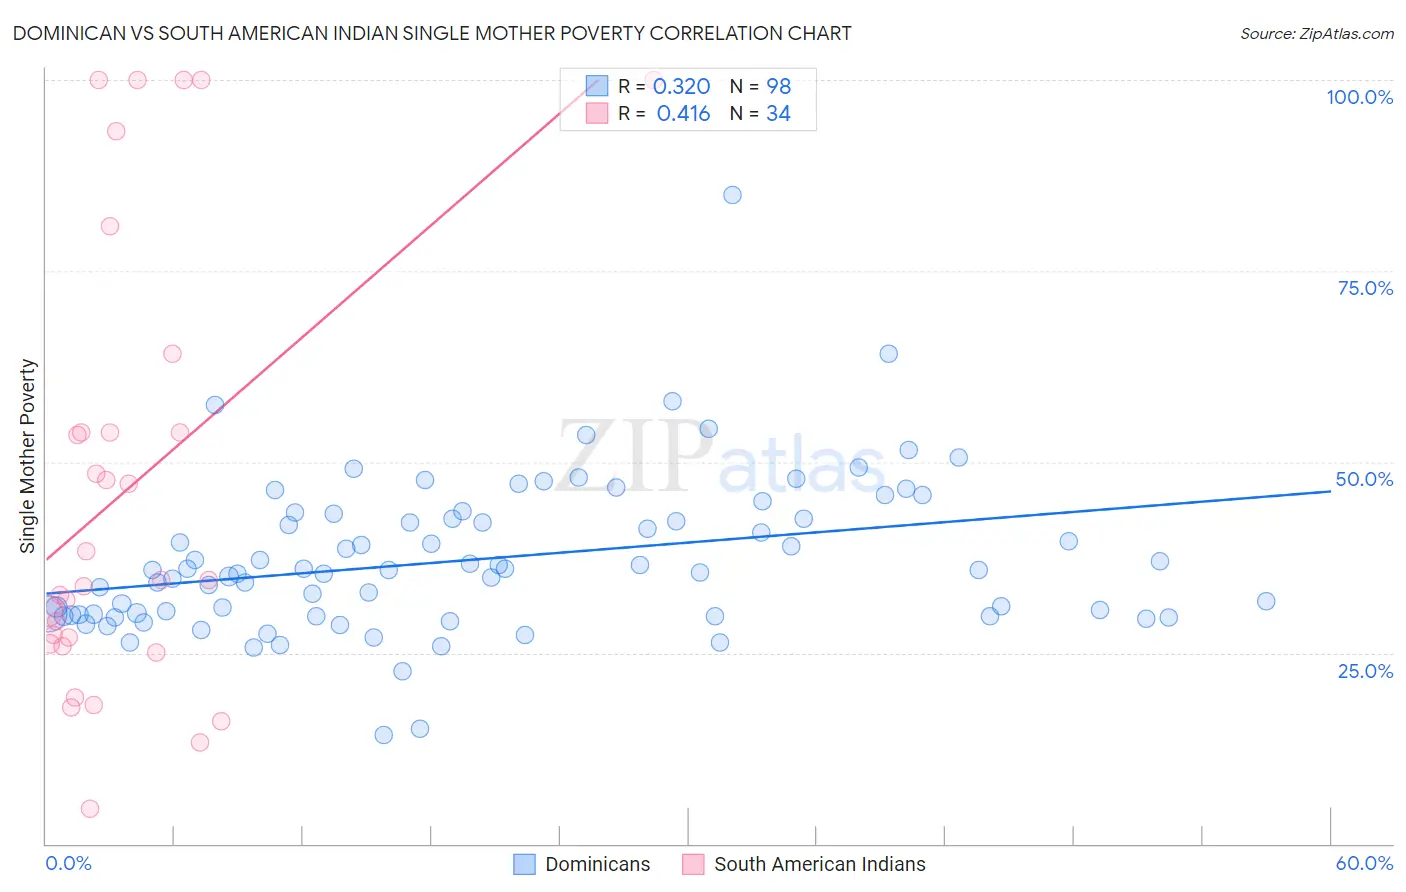 Dominican vs South American Indian Single Mother Poverty